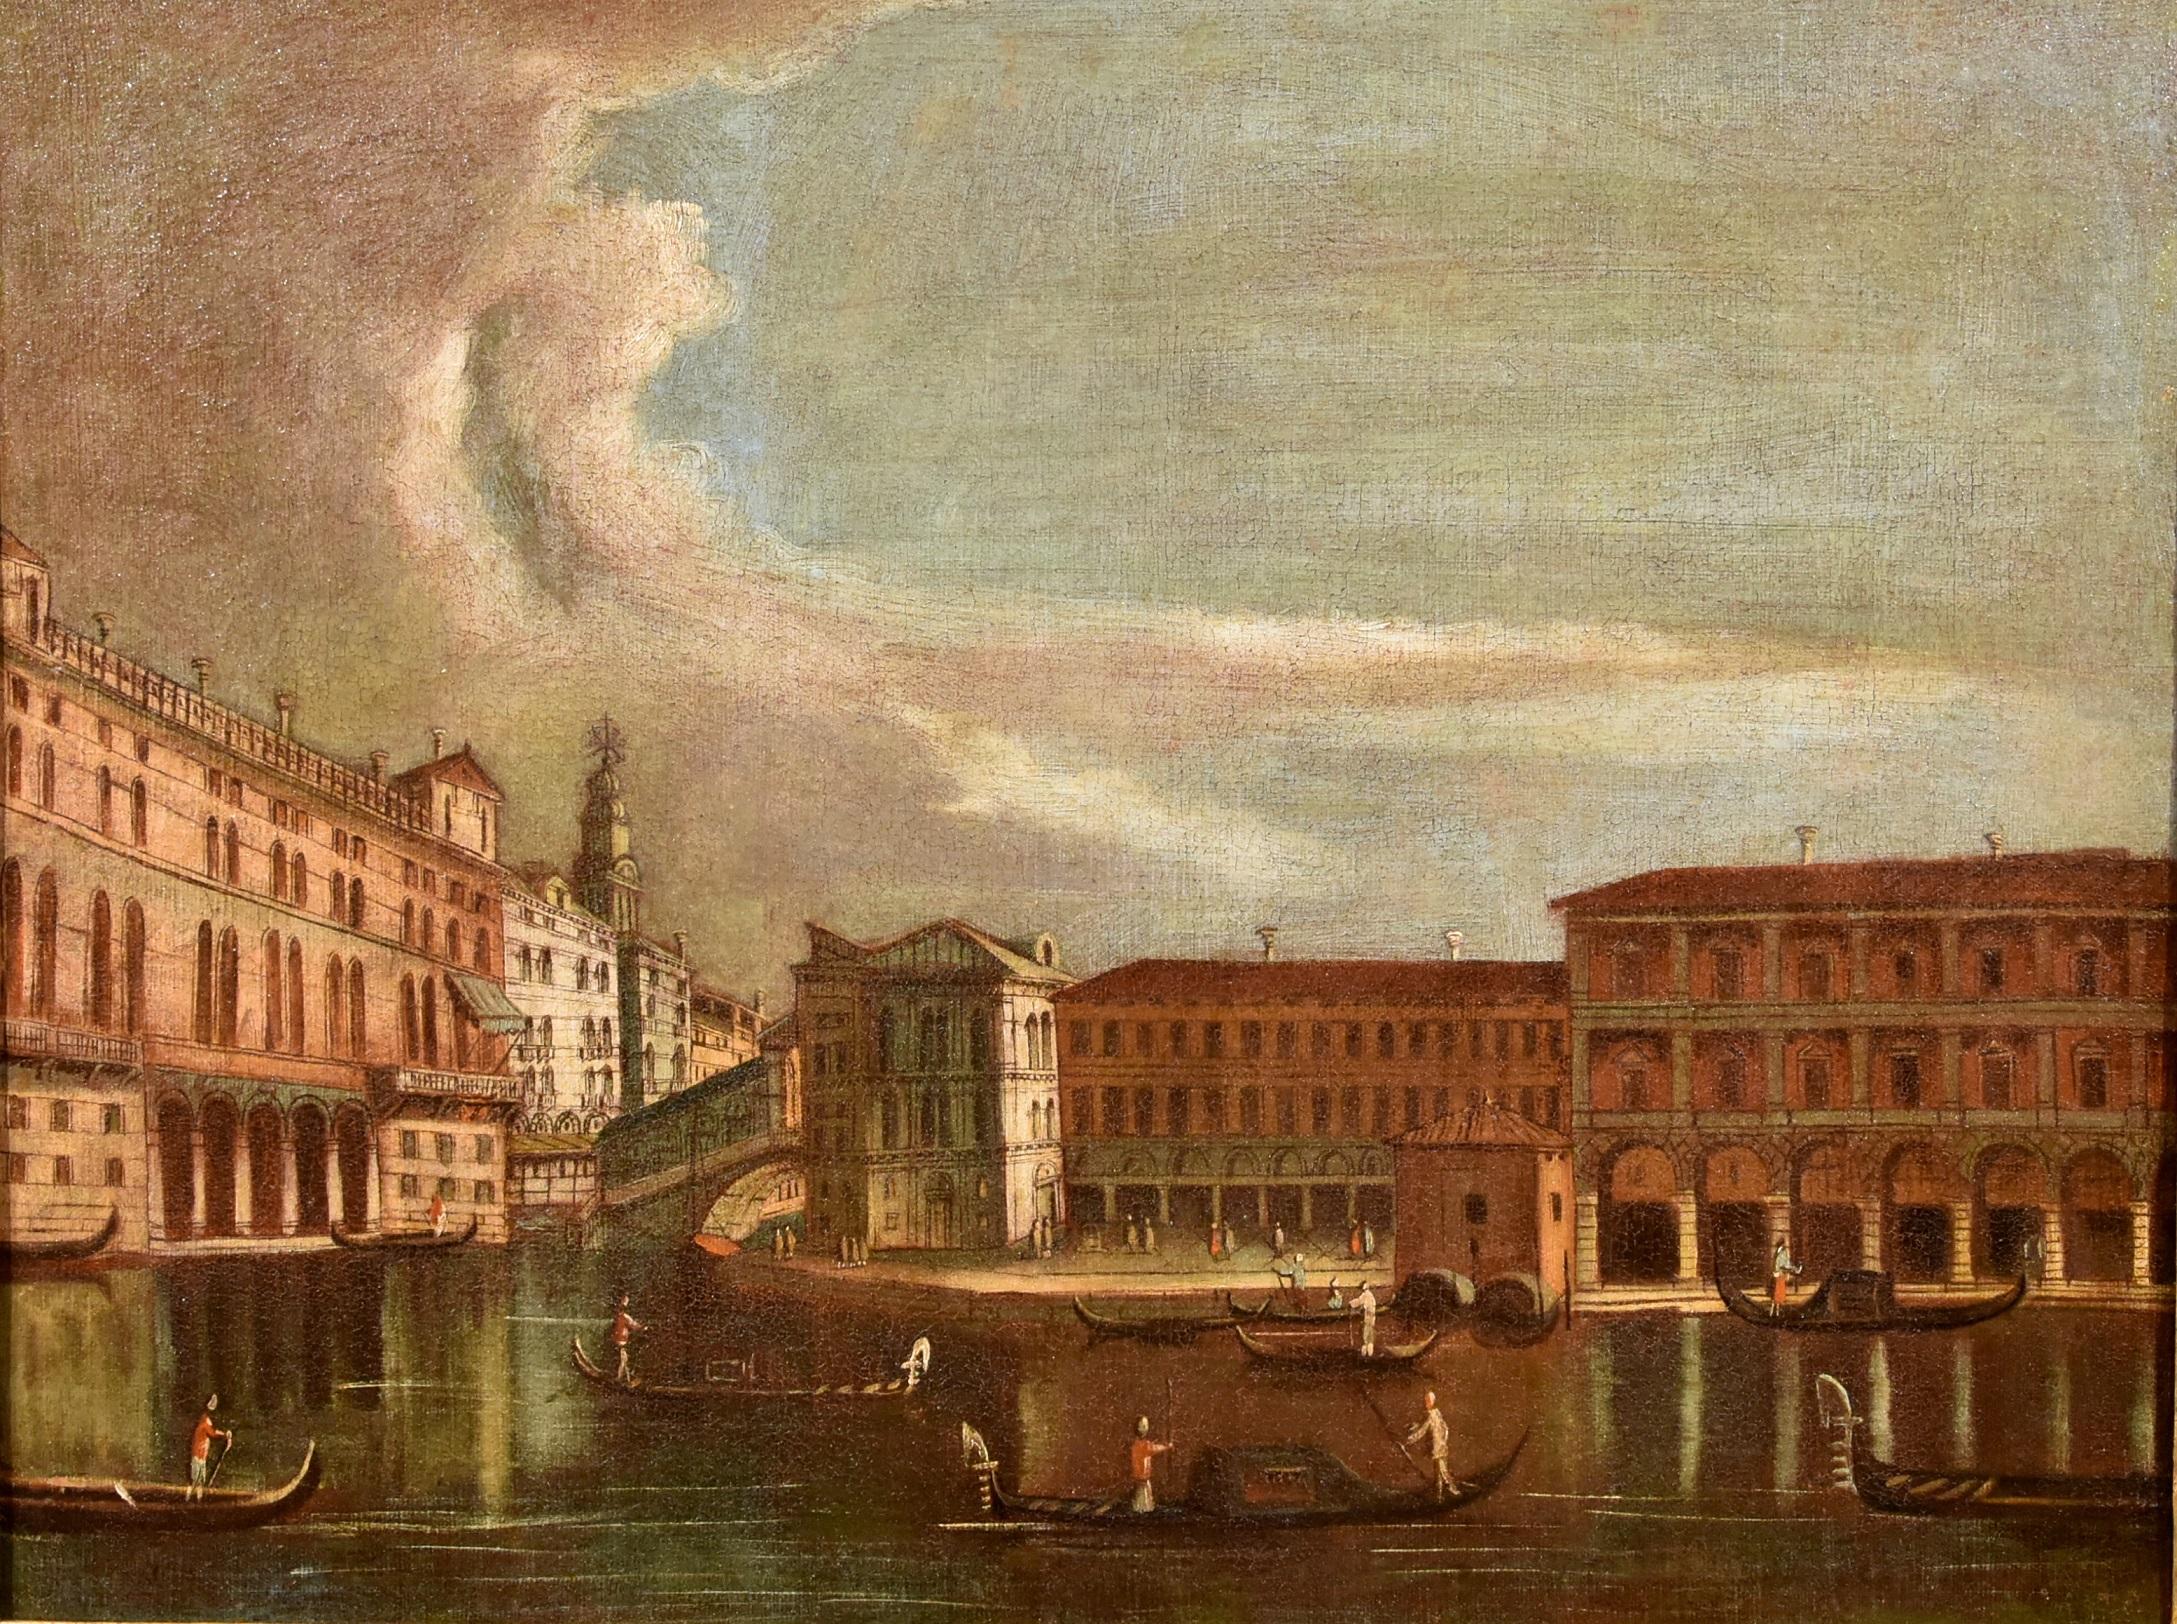 Tironi Venice Grand Canal Landscape Paint Oil on canvas Old master 18th Century - Painting by Francesco Tironi (Venice, about 1745 - 1797)